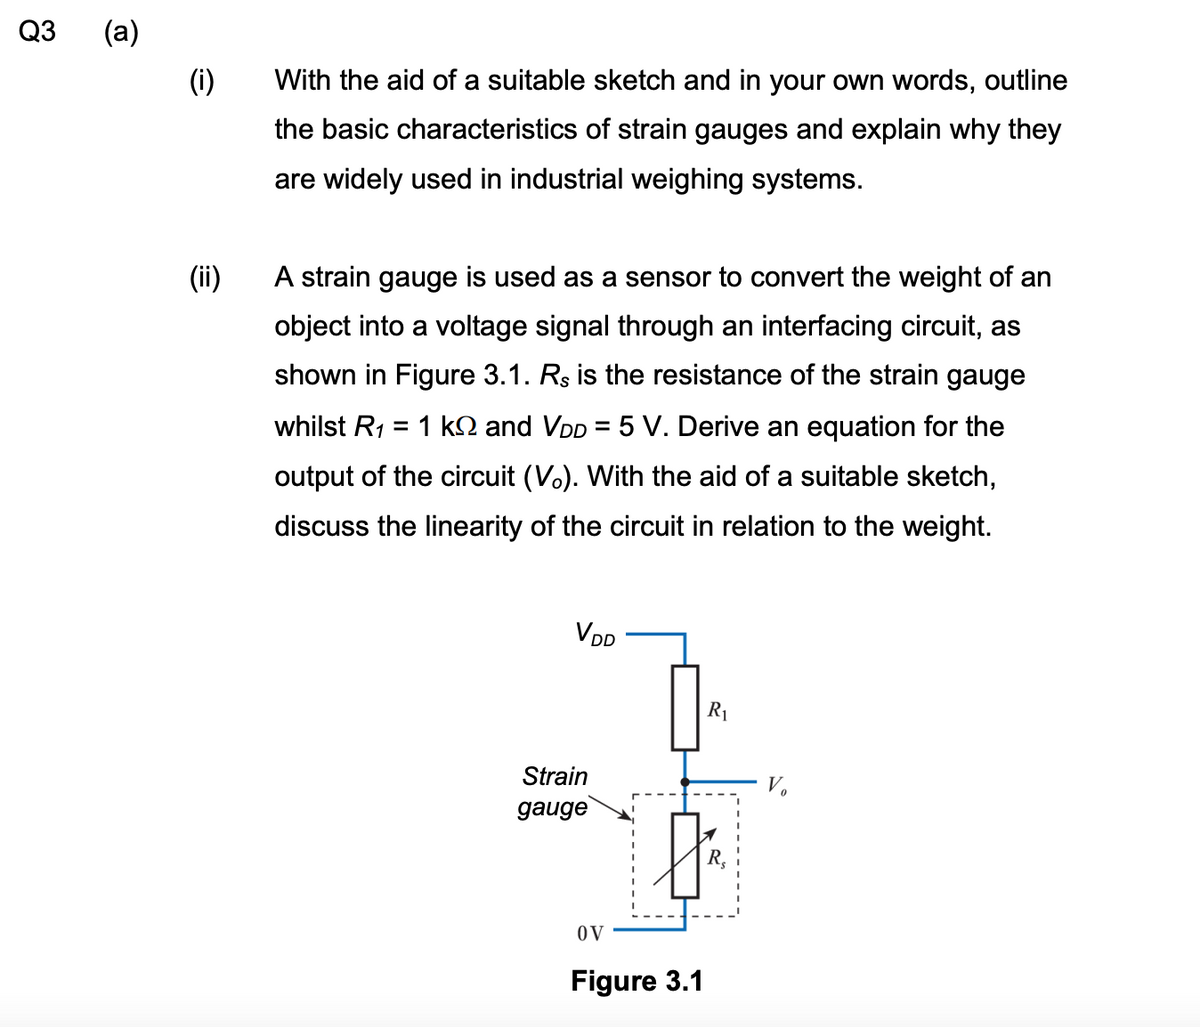 Q3
(a)
(i)
(ii)
With the aid of a suitable sketch and in your own words, outline
the basic characteristics of strain gauges and explain why they
are widely used in industrial weighing systems.
A strain gauge is used as a sensor to convert the weight of an
object into a voltage signal through an interfacing circuit, as
shown in Figure 3.1. Rs is the resistance of the strain gauge
whilst R₁ = 1 k and VDD = 5 V. Derive an equation for the
output of the circuit (Vo). With the aid of a suitable sketch,
discuss the linearity of the circuit in relation to the weight.
VDD
R₁
Strain
gauge
OV
Figure 3.1
R₂